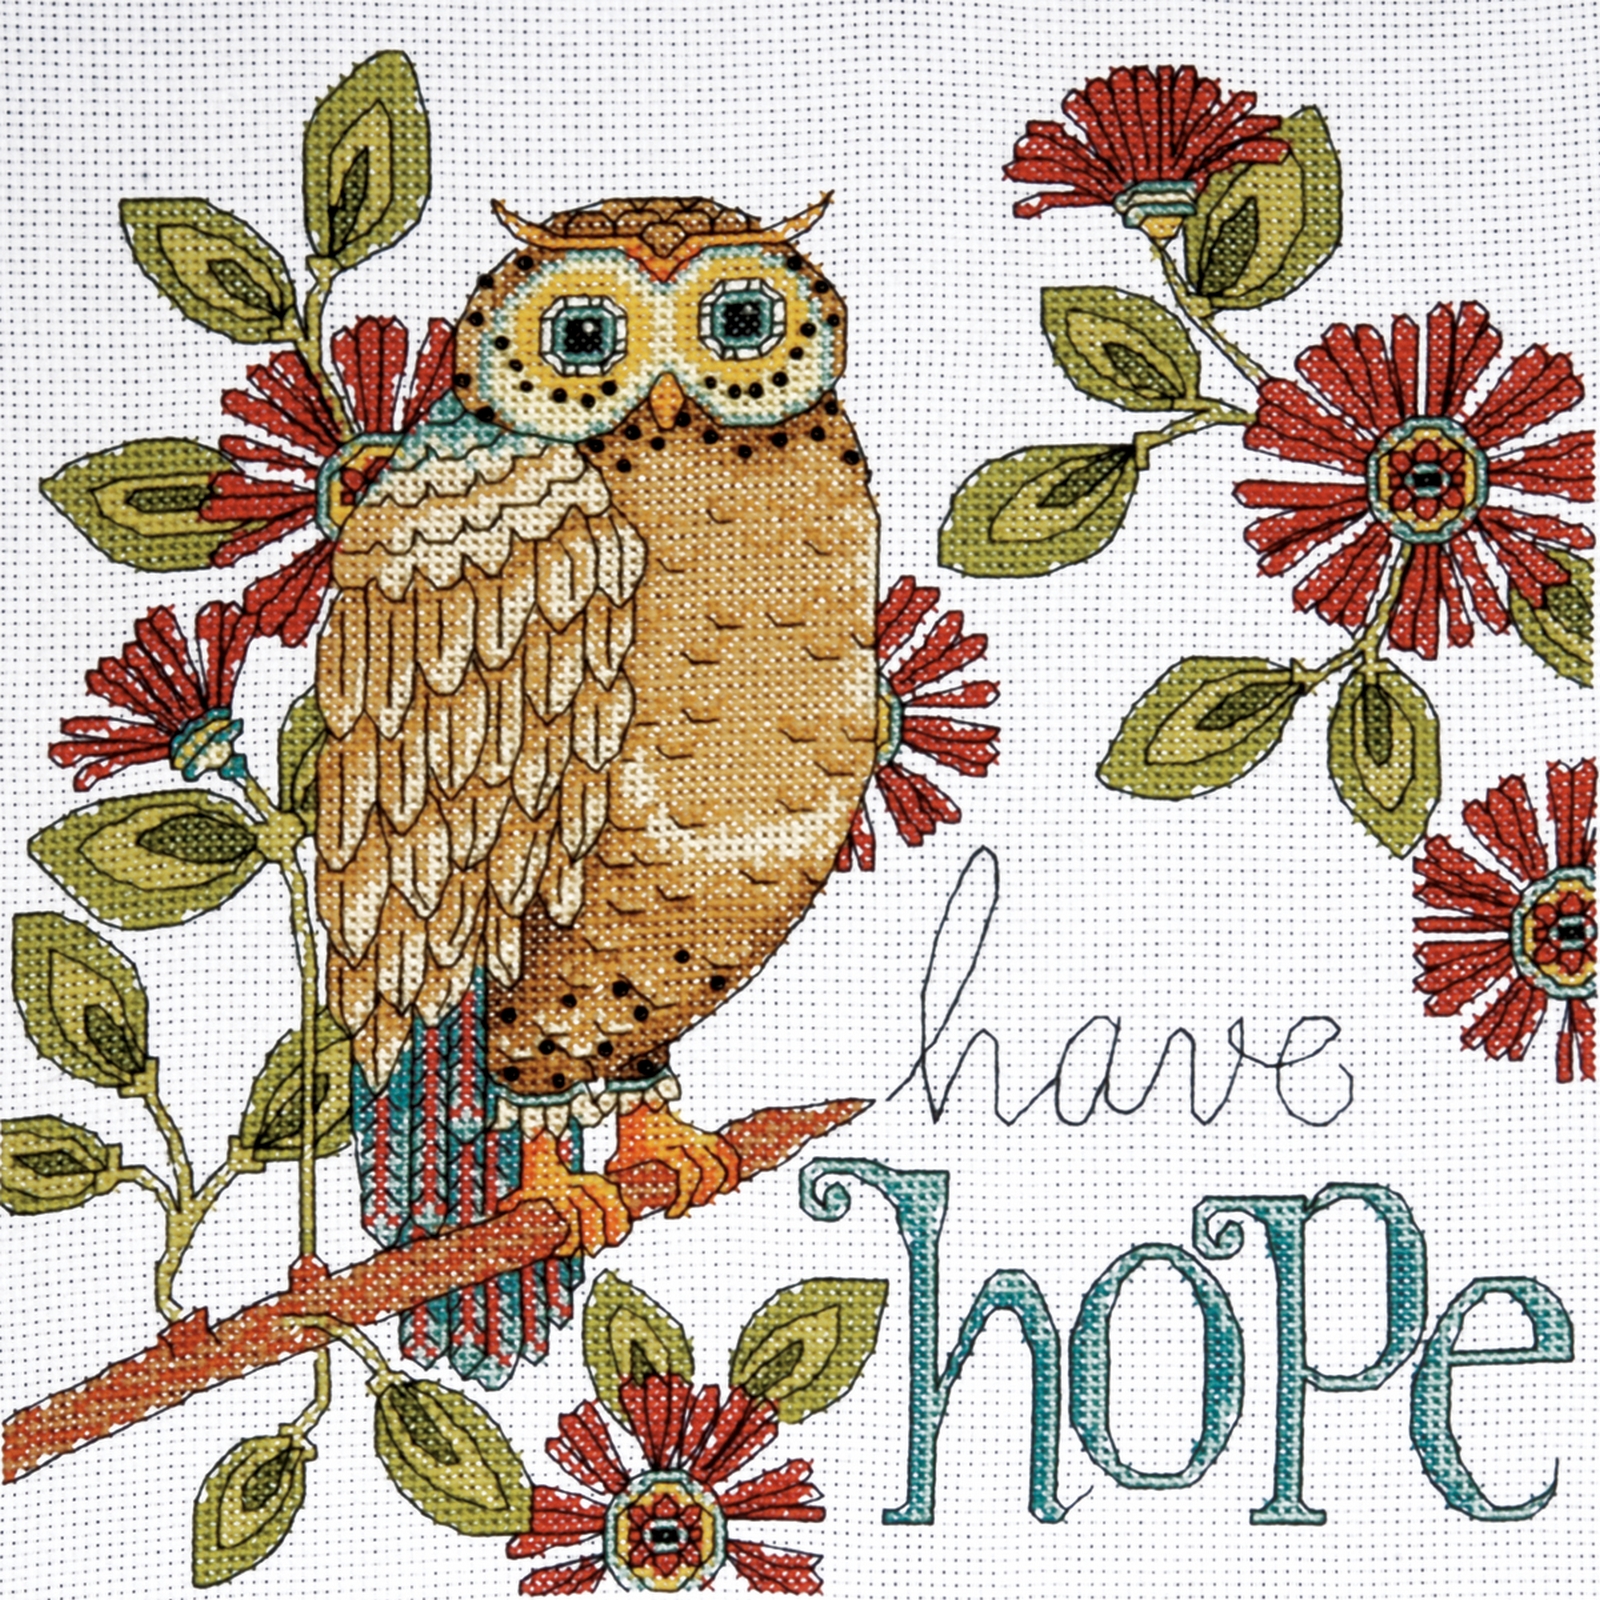 Tobin Heartfelt Have Hope Owl Counted Cross Stitch Kit 14 Count